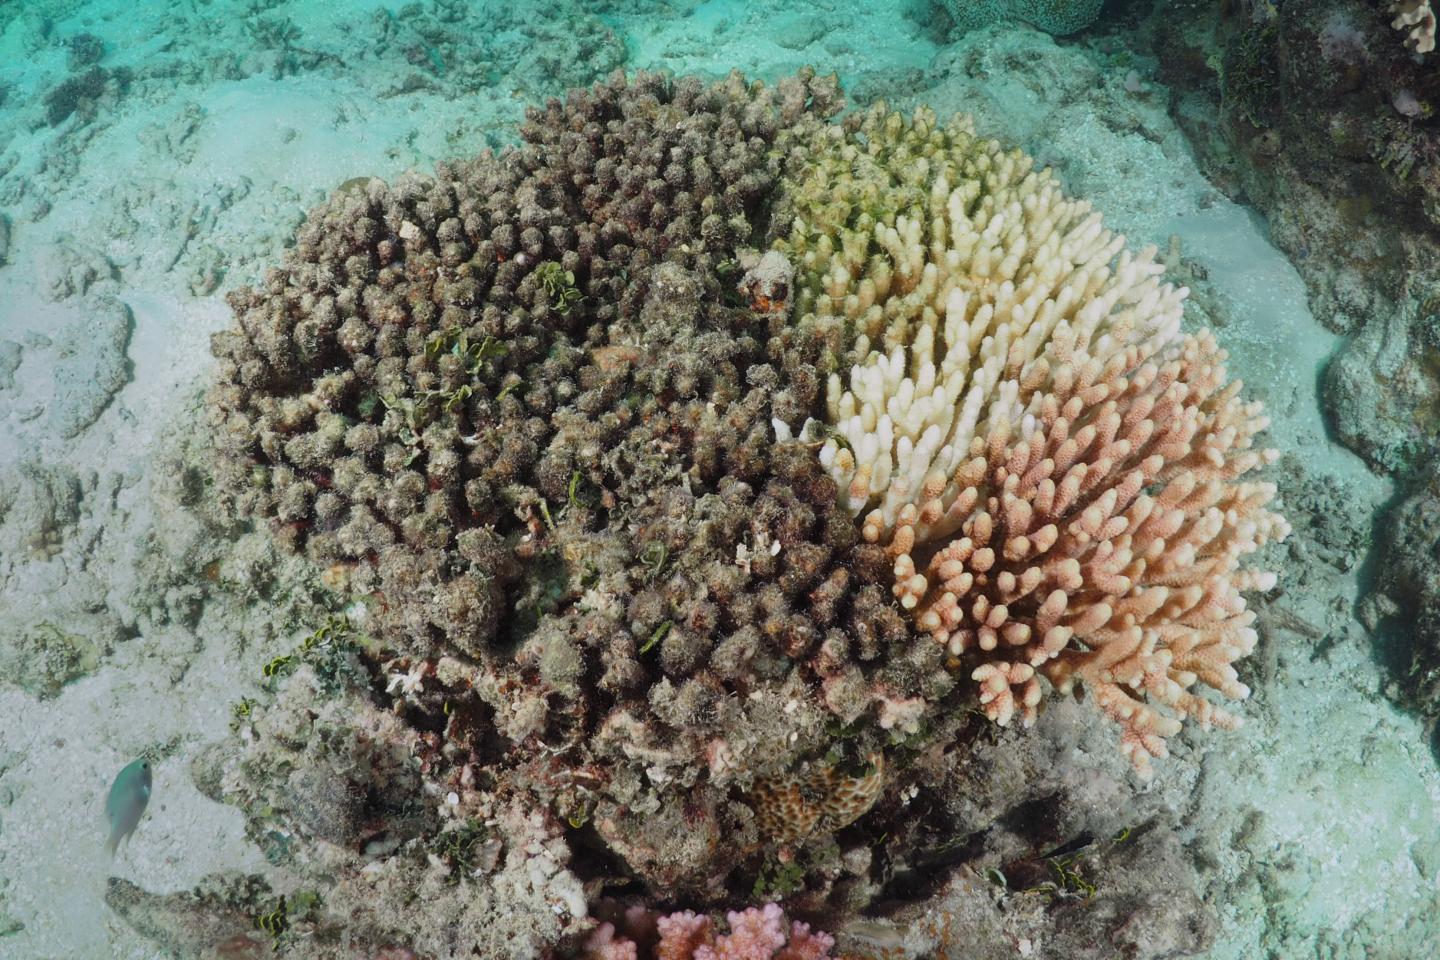 Coral colony in mu.ltiple stages of bleaching and mortality, Great Barrier Reef, 2017. Source: Australian Institute of Marine Science / Chris Brunner